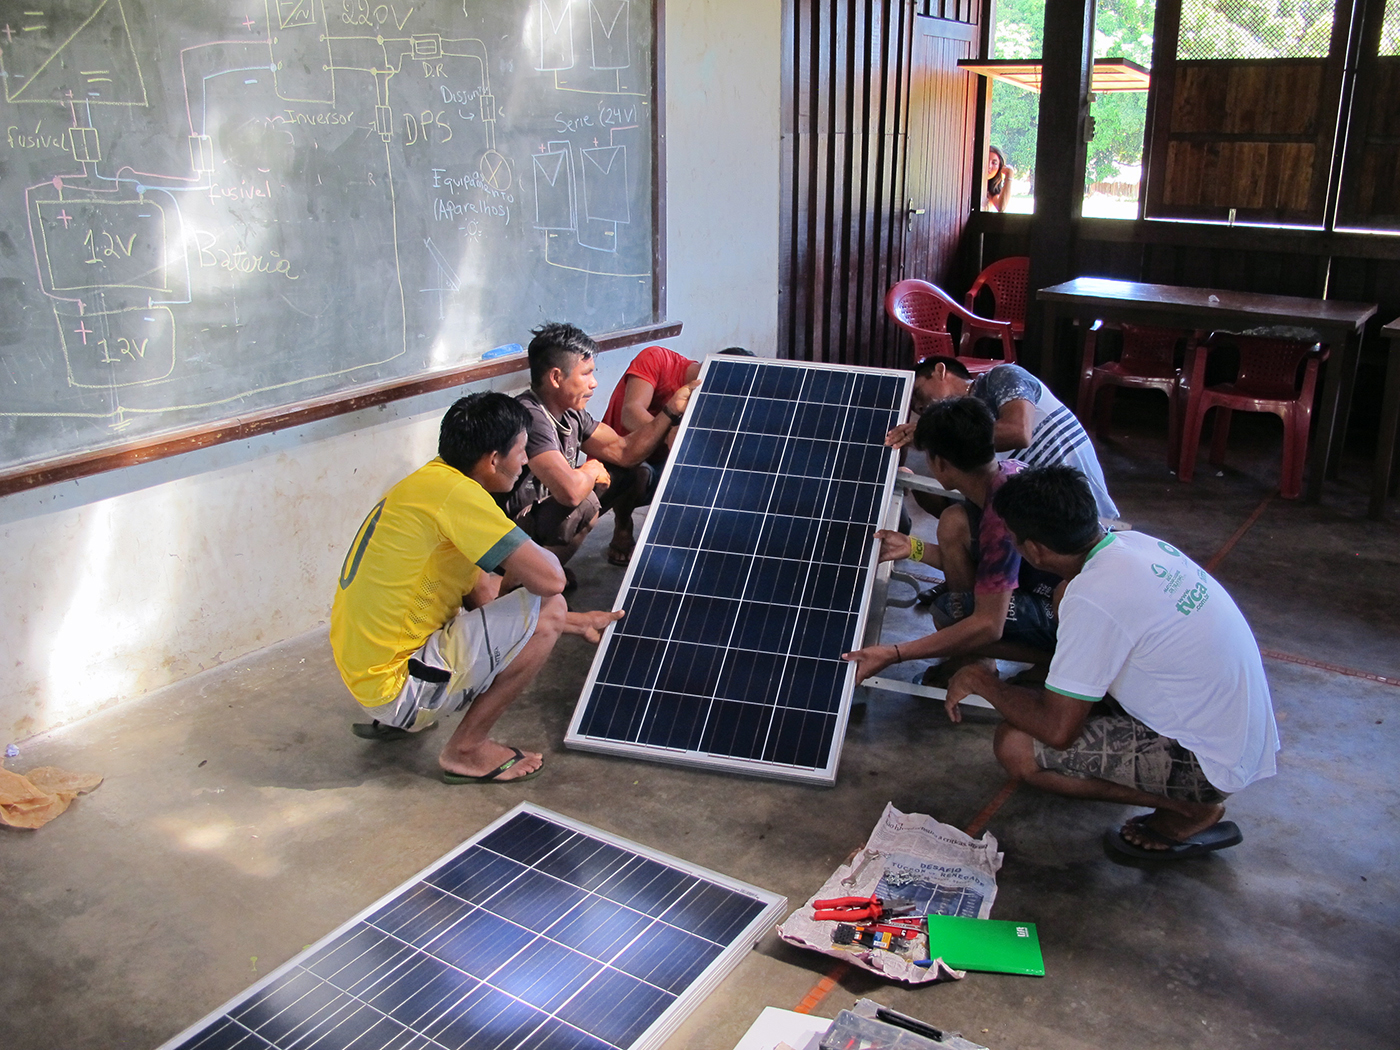 As part of the solar power project, 100 men in the Xingu learned how to install and maintain solar panels. Photo: Traci Romine